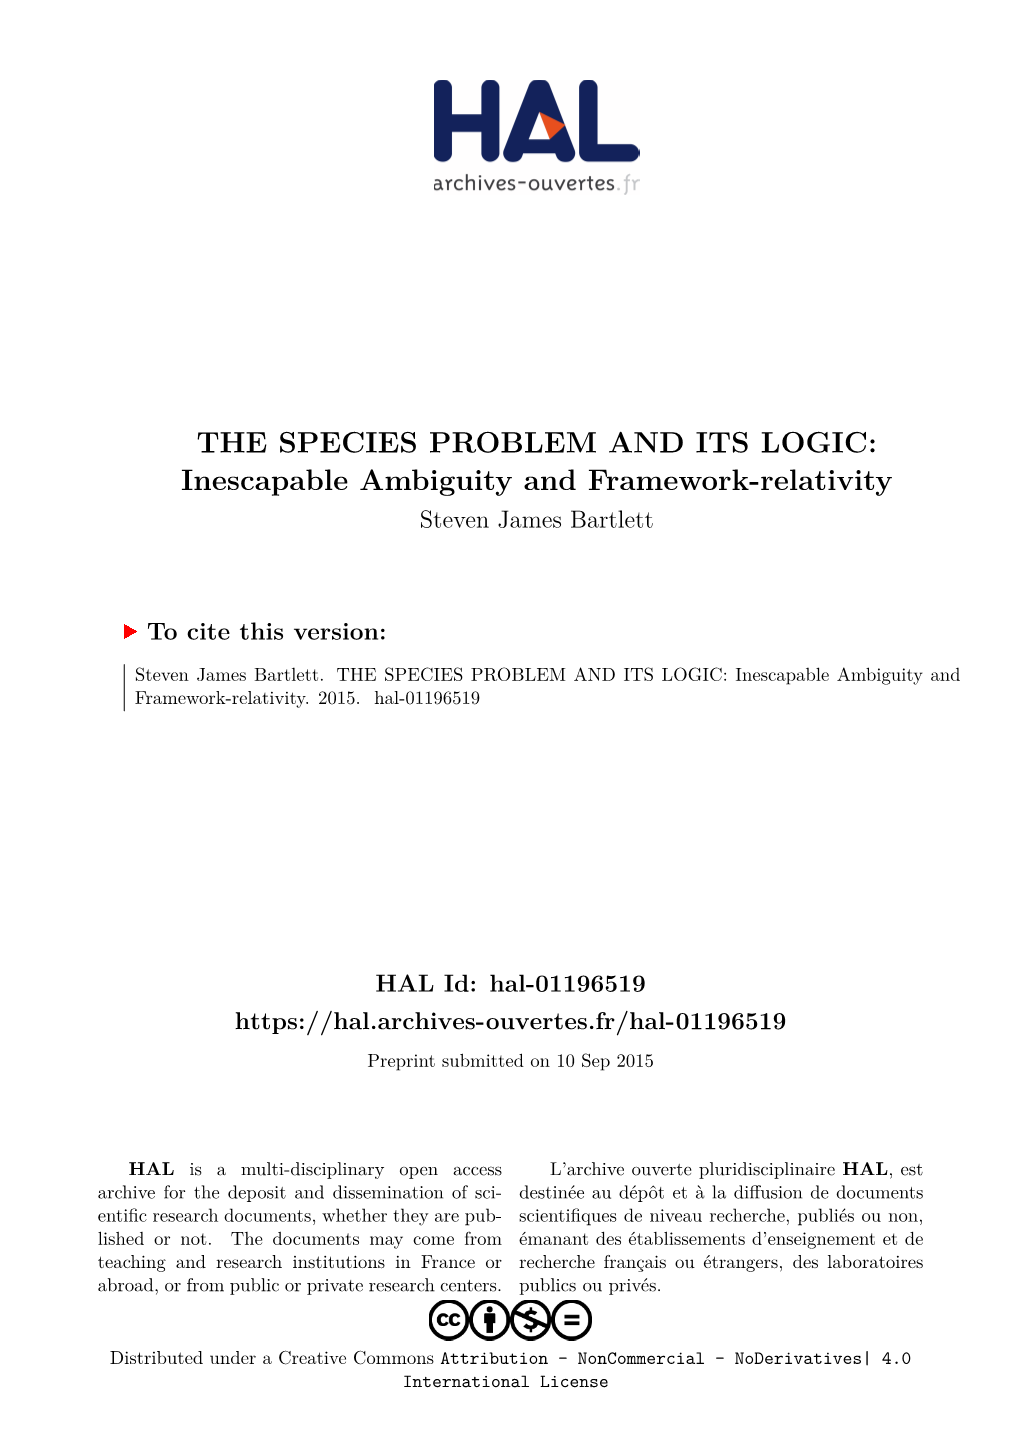 THE SPECIES PROBLEM and ITS LOGIC: Inescapable Ambiguity and Framework-Relativity Steven James Bartlett